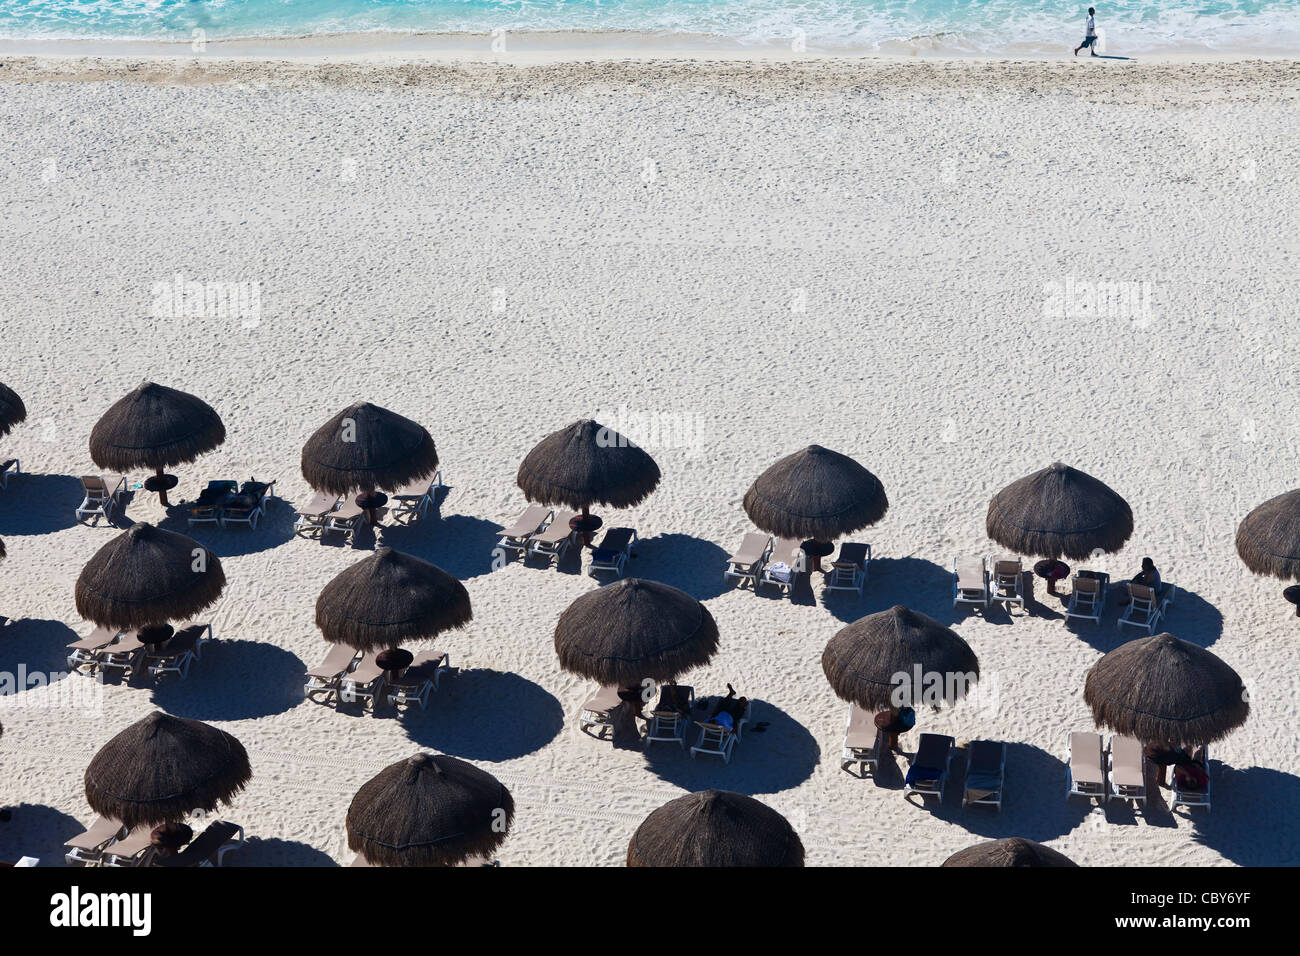 View of umbrellas from 7th floor of Krystal Hotel, Cancun, Mexico, Hotel Zone Stock Photo